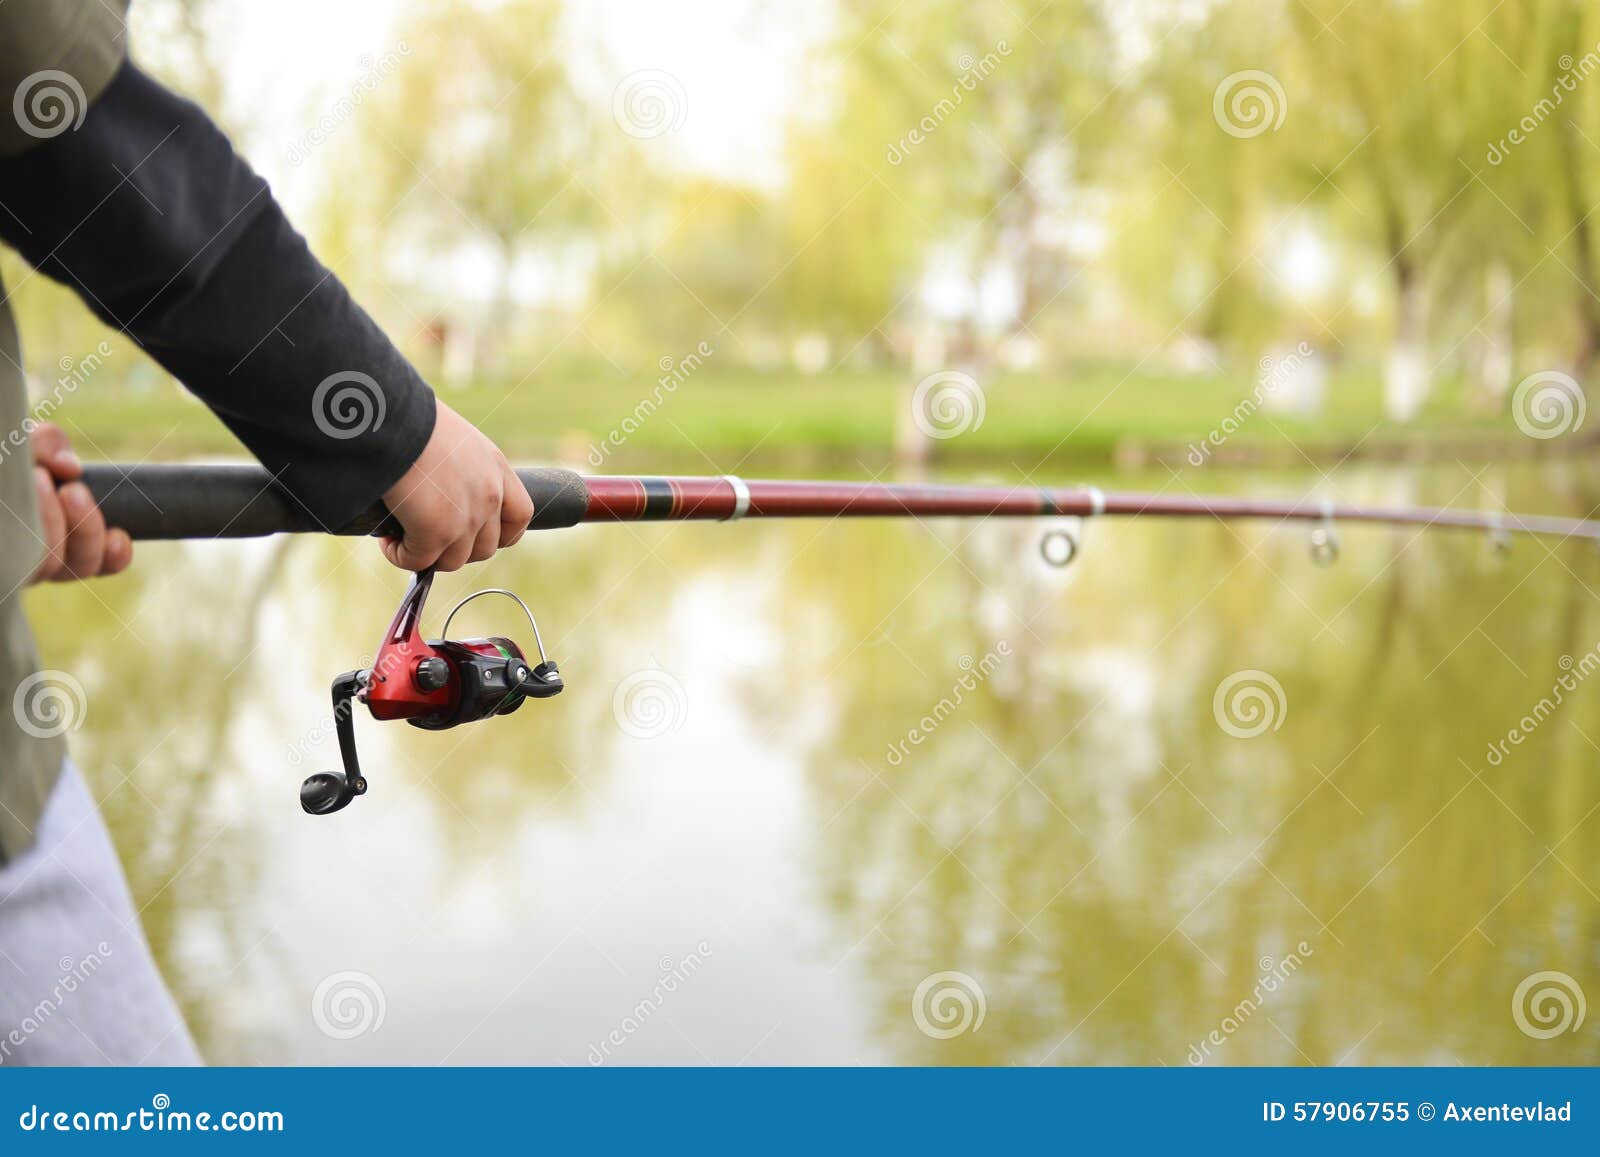 Closeup of Fisherman`s Hand Holding Rod with Spinning Stock Image - Image  of equipment, active: 57906755